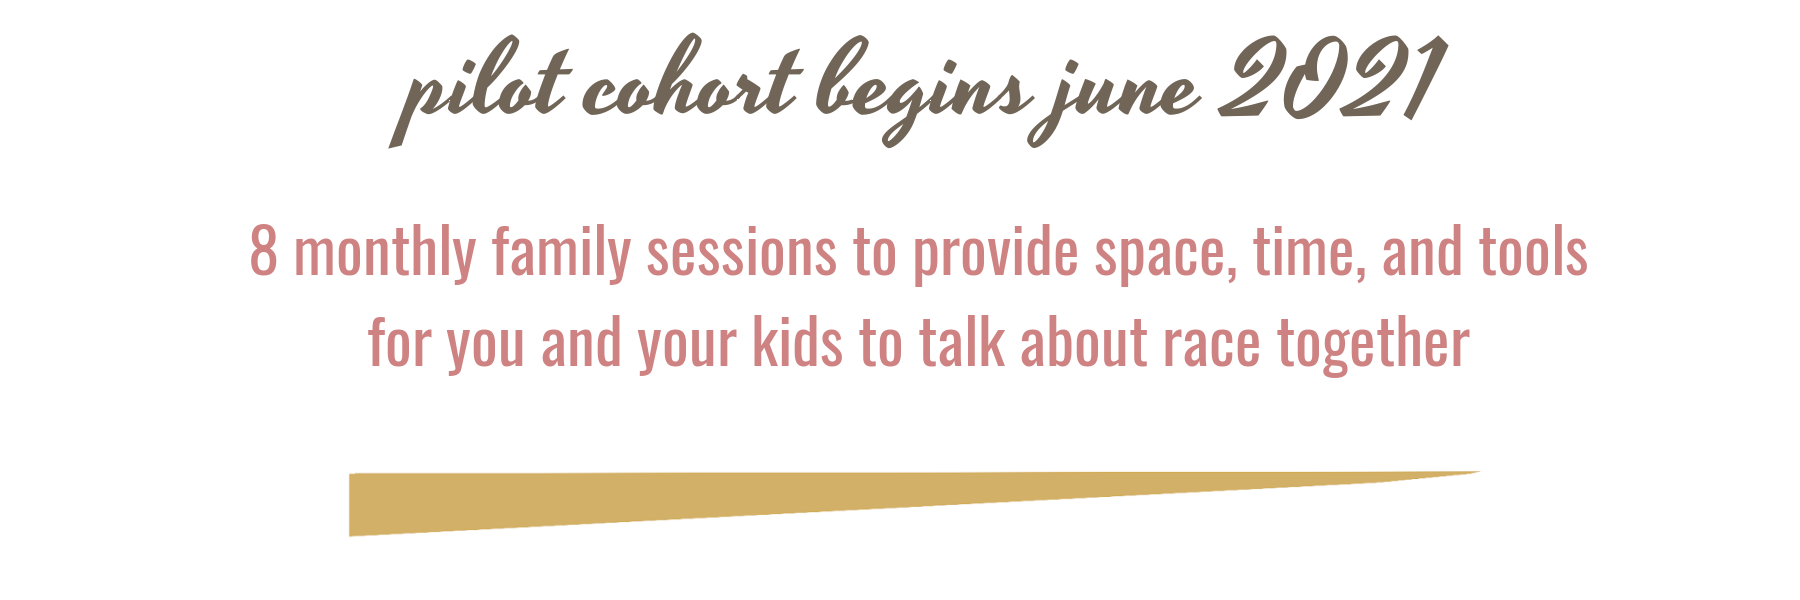 Pilot cohort begins June 2021. 8 monthly family sessions to provide space, time, and tools for you and your kids to talk about race together.